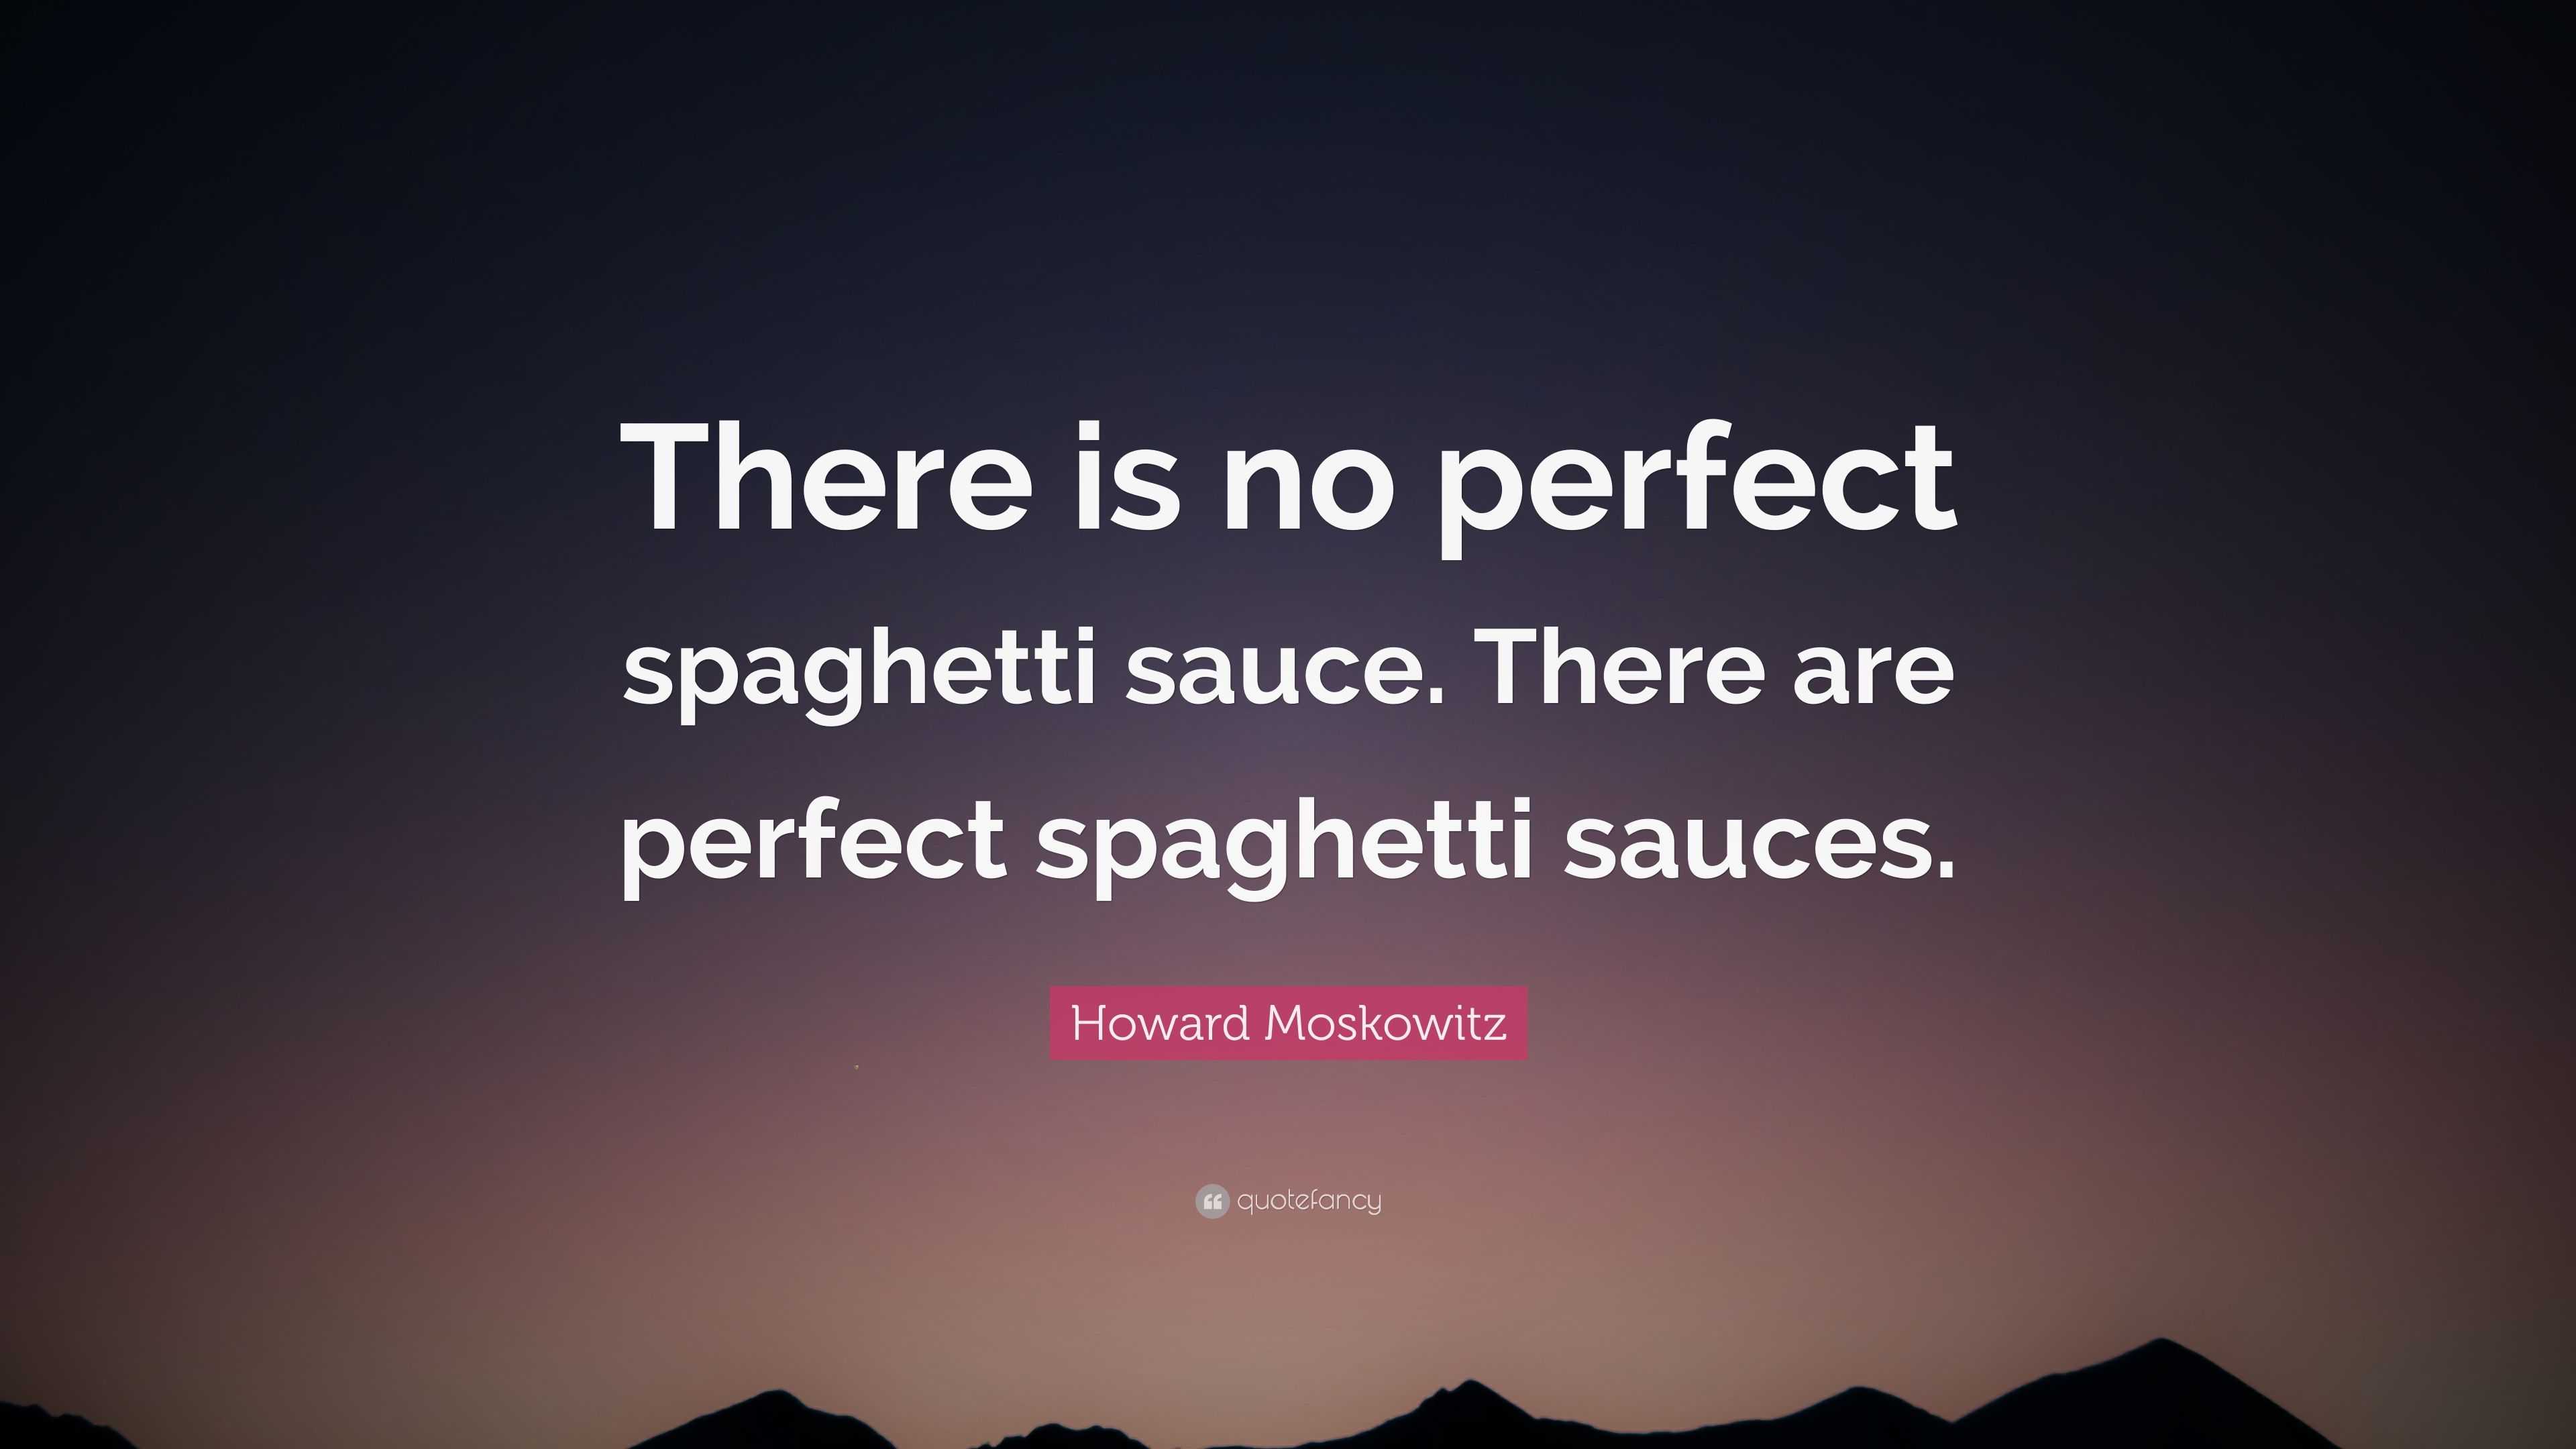 Howard Moskowitz Quote: “There is no perfect spaghetti sauce. There are ...